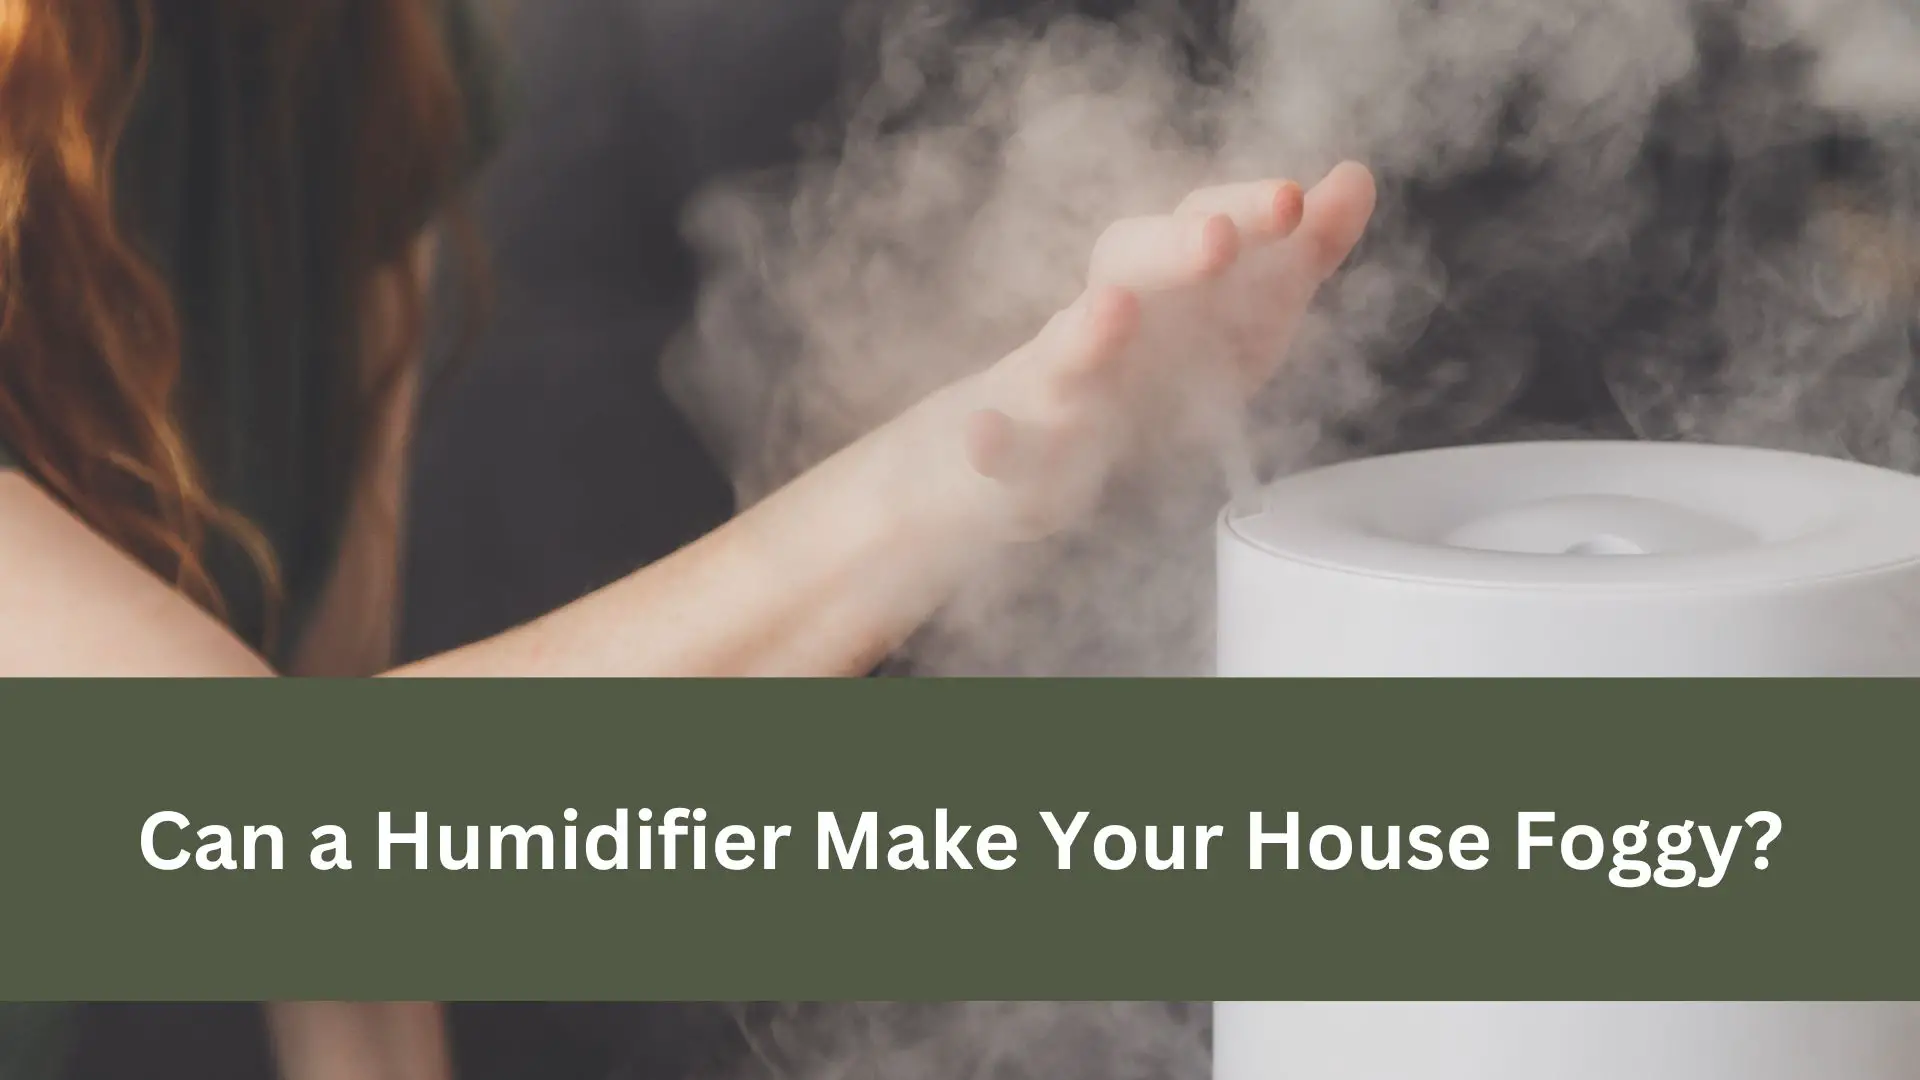 Can a Humidifier Make Your House Foggy